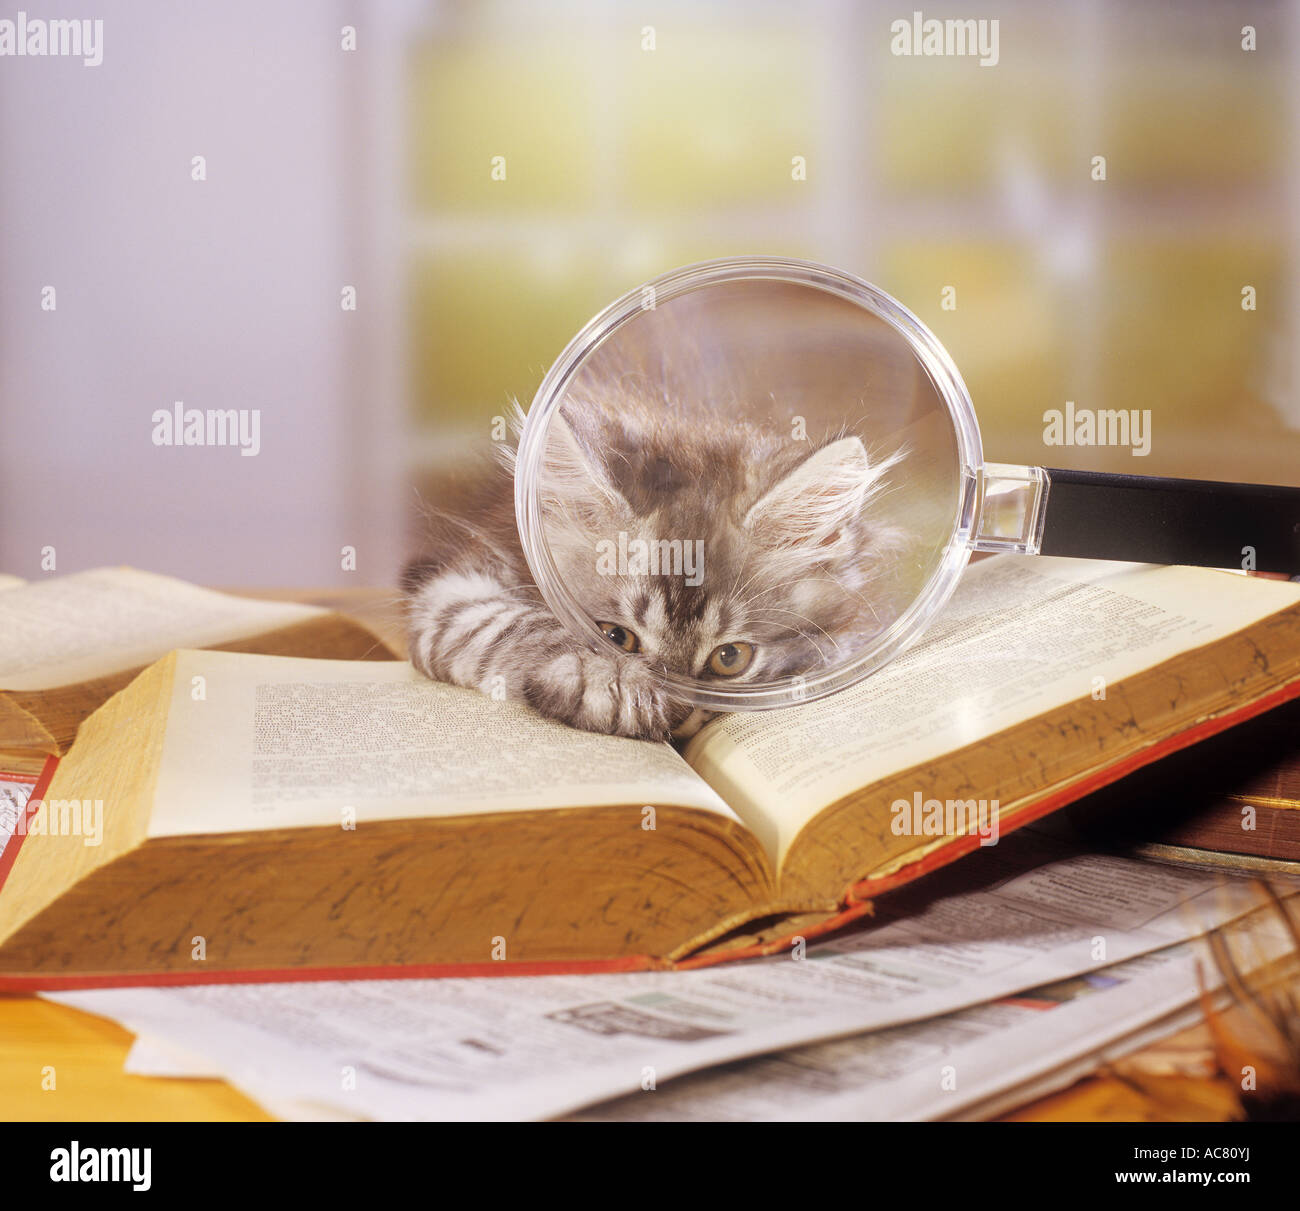 cat with book and magnifying glass Stock Photo